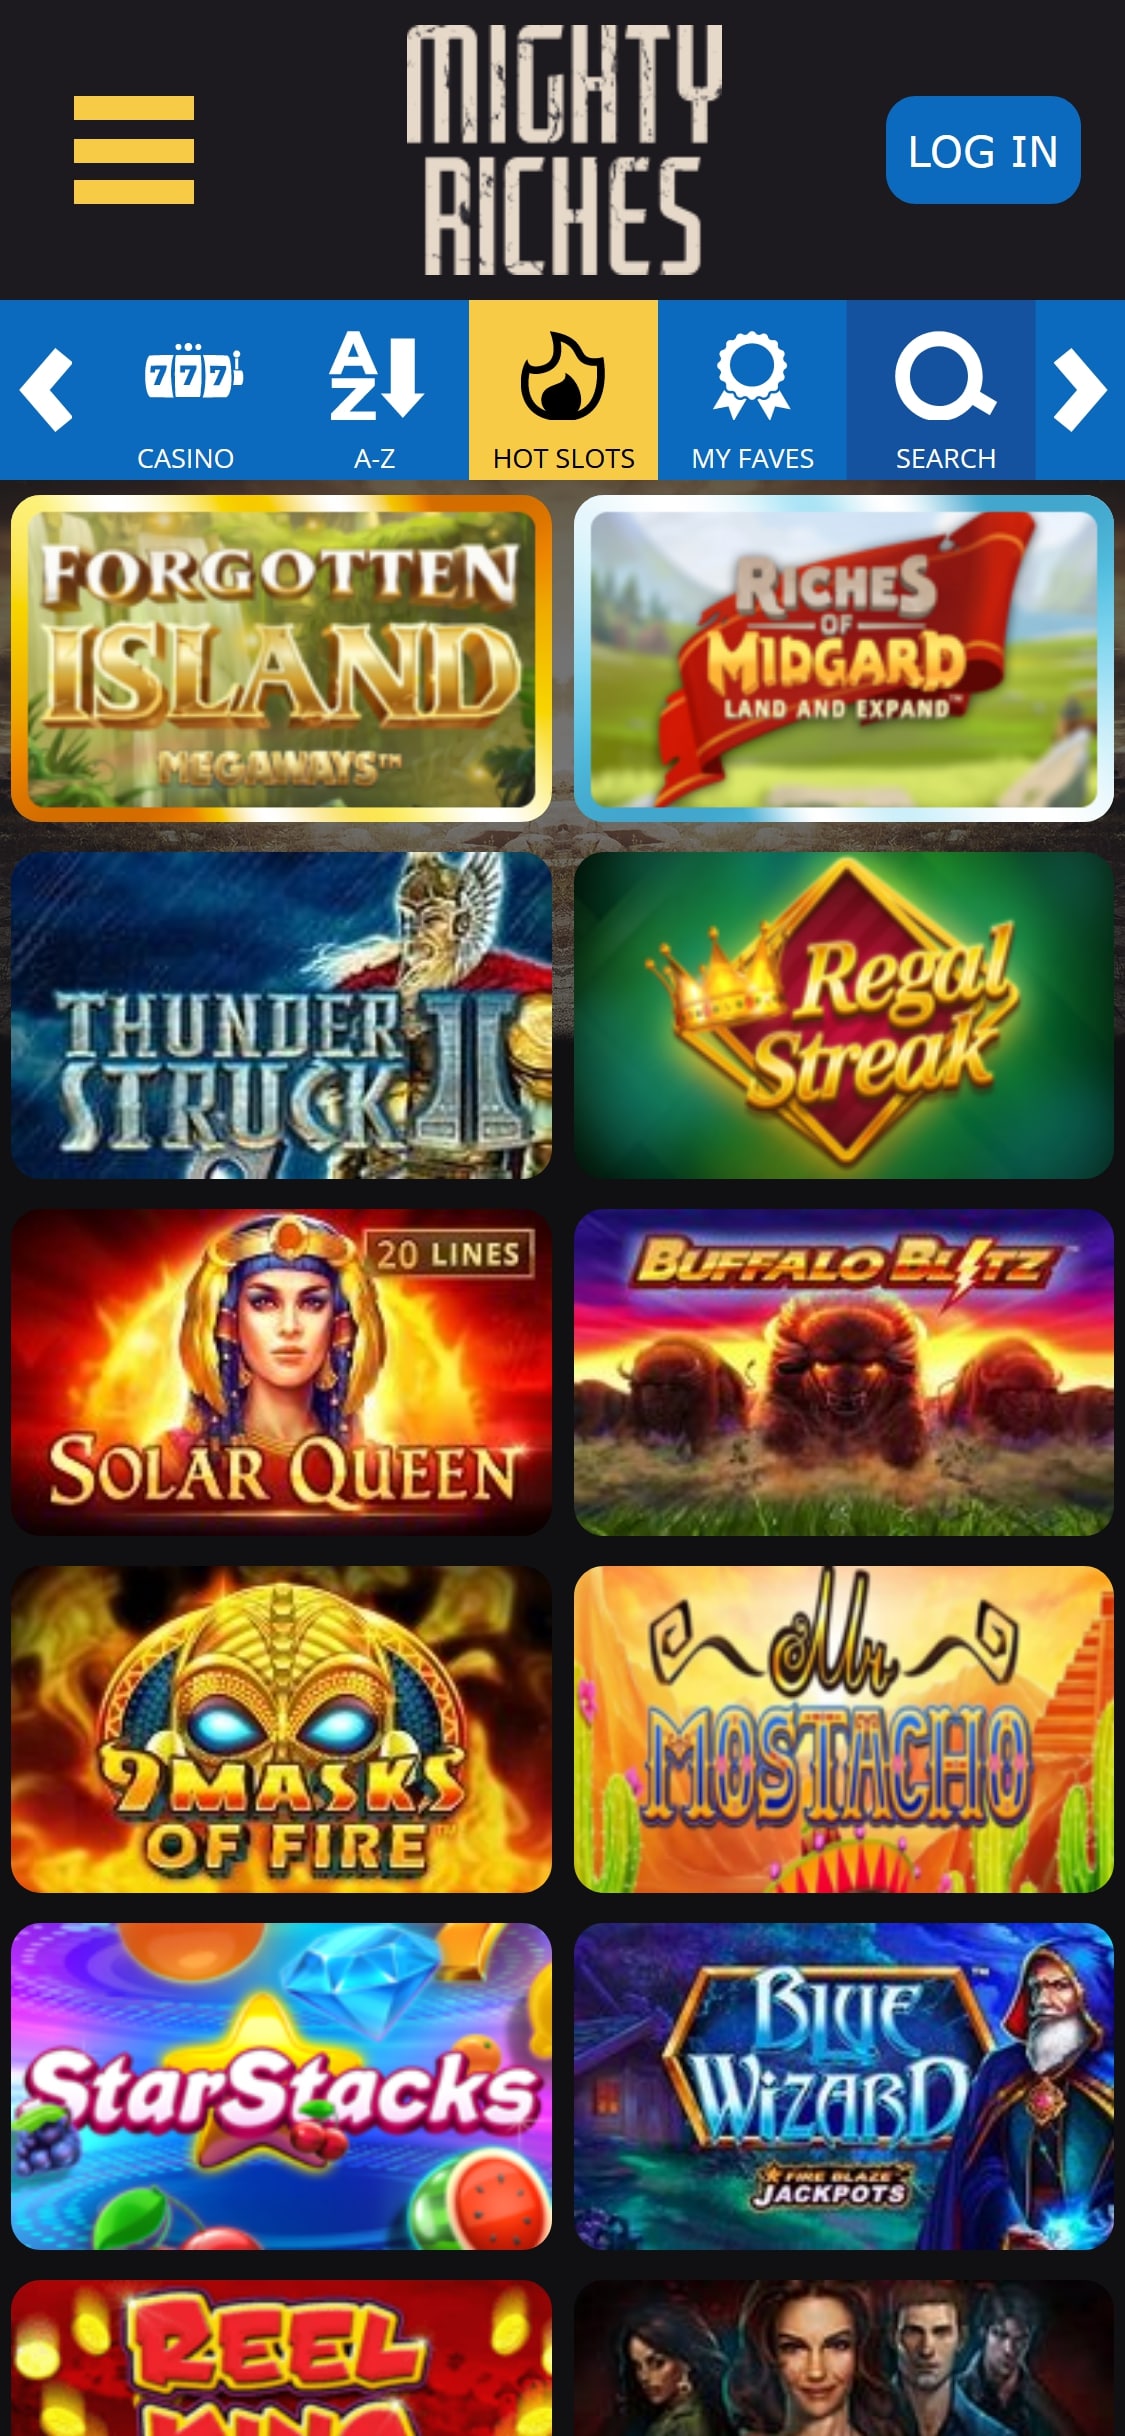 Mighty Riches Casino Mobile Games Review